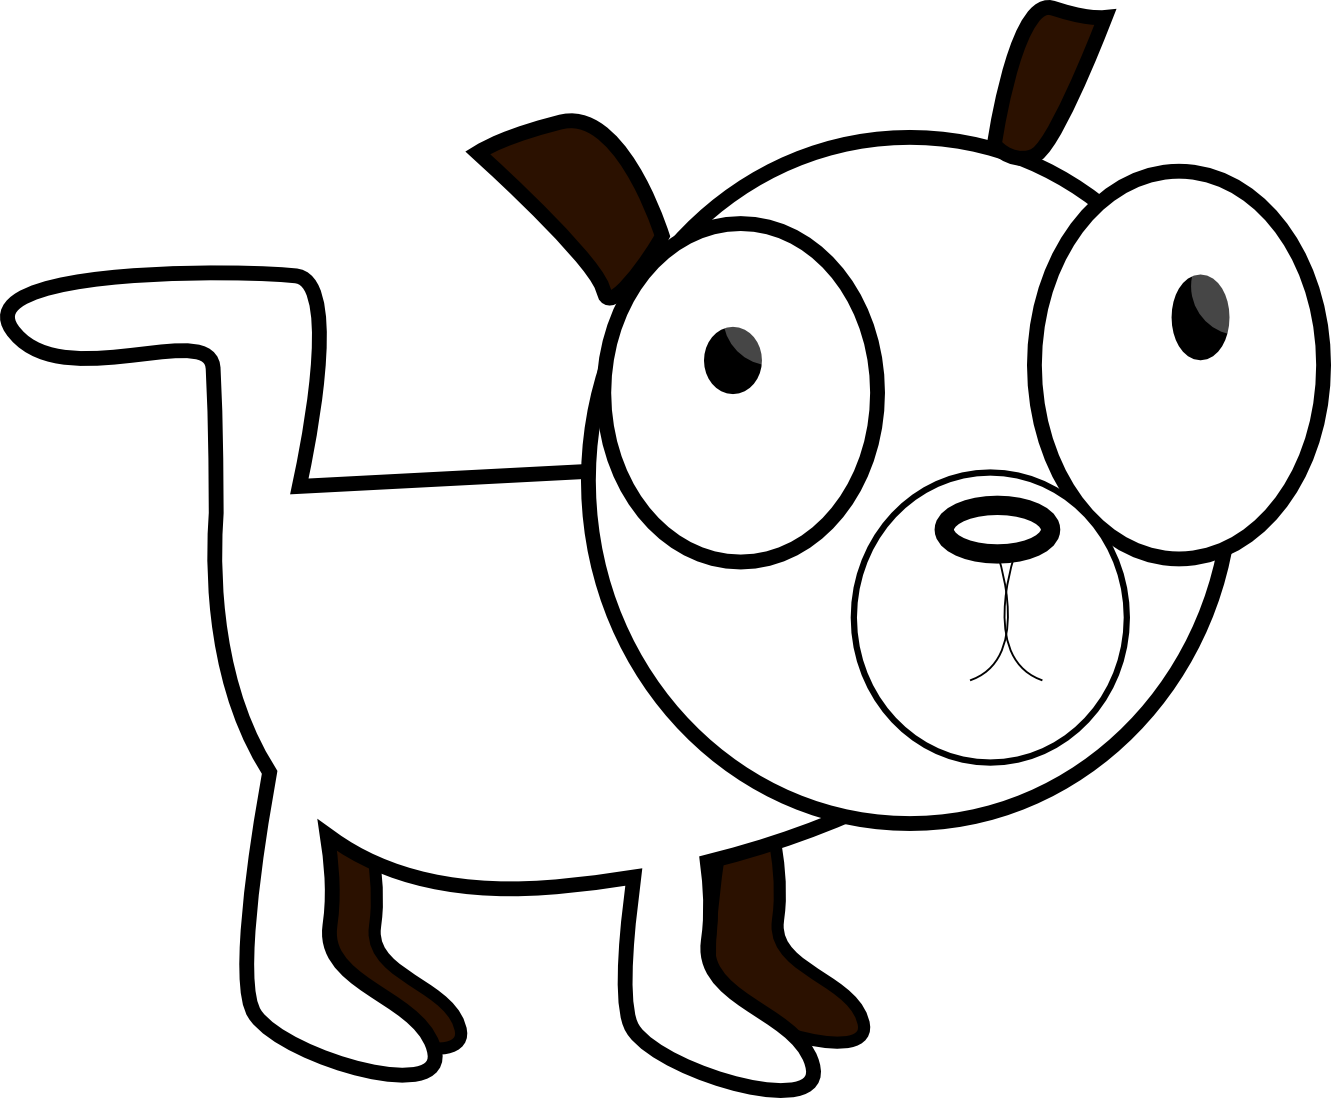 Dog Face Clipart Black And White | Clipart Panda - Free Clipart Images